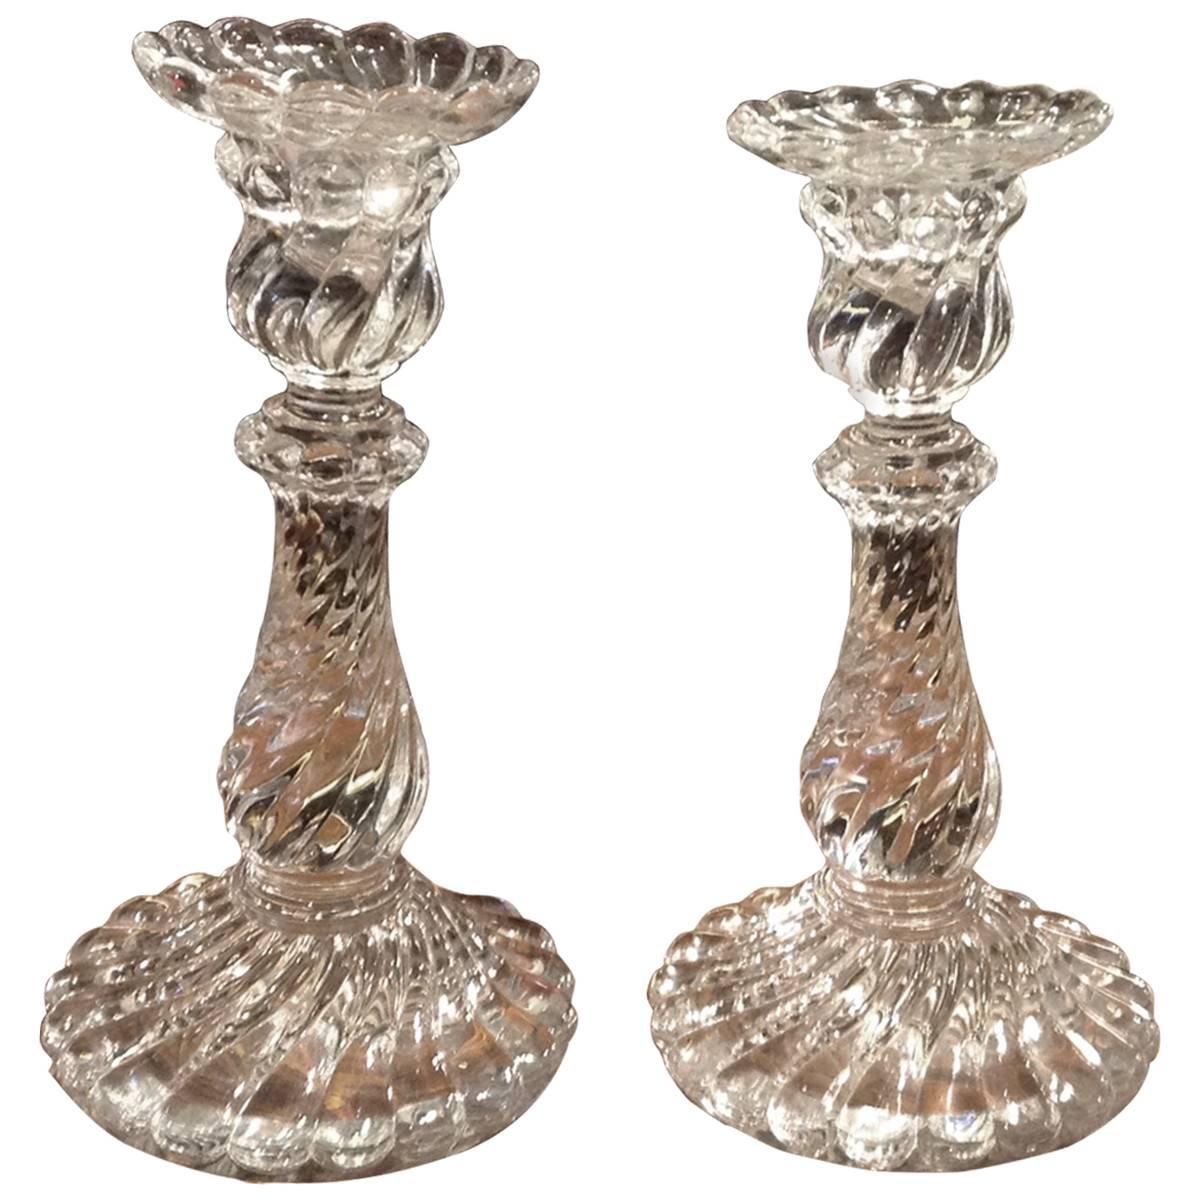 Baccarat Antique Crystal Pair of Candlesticks